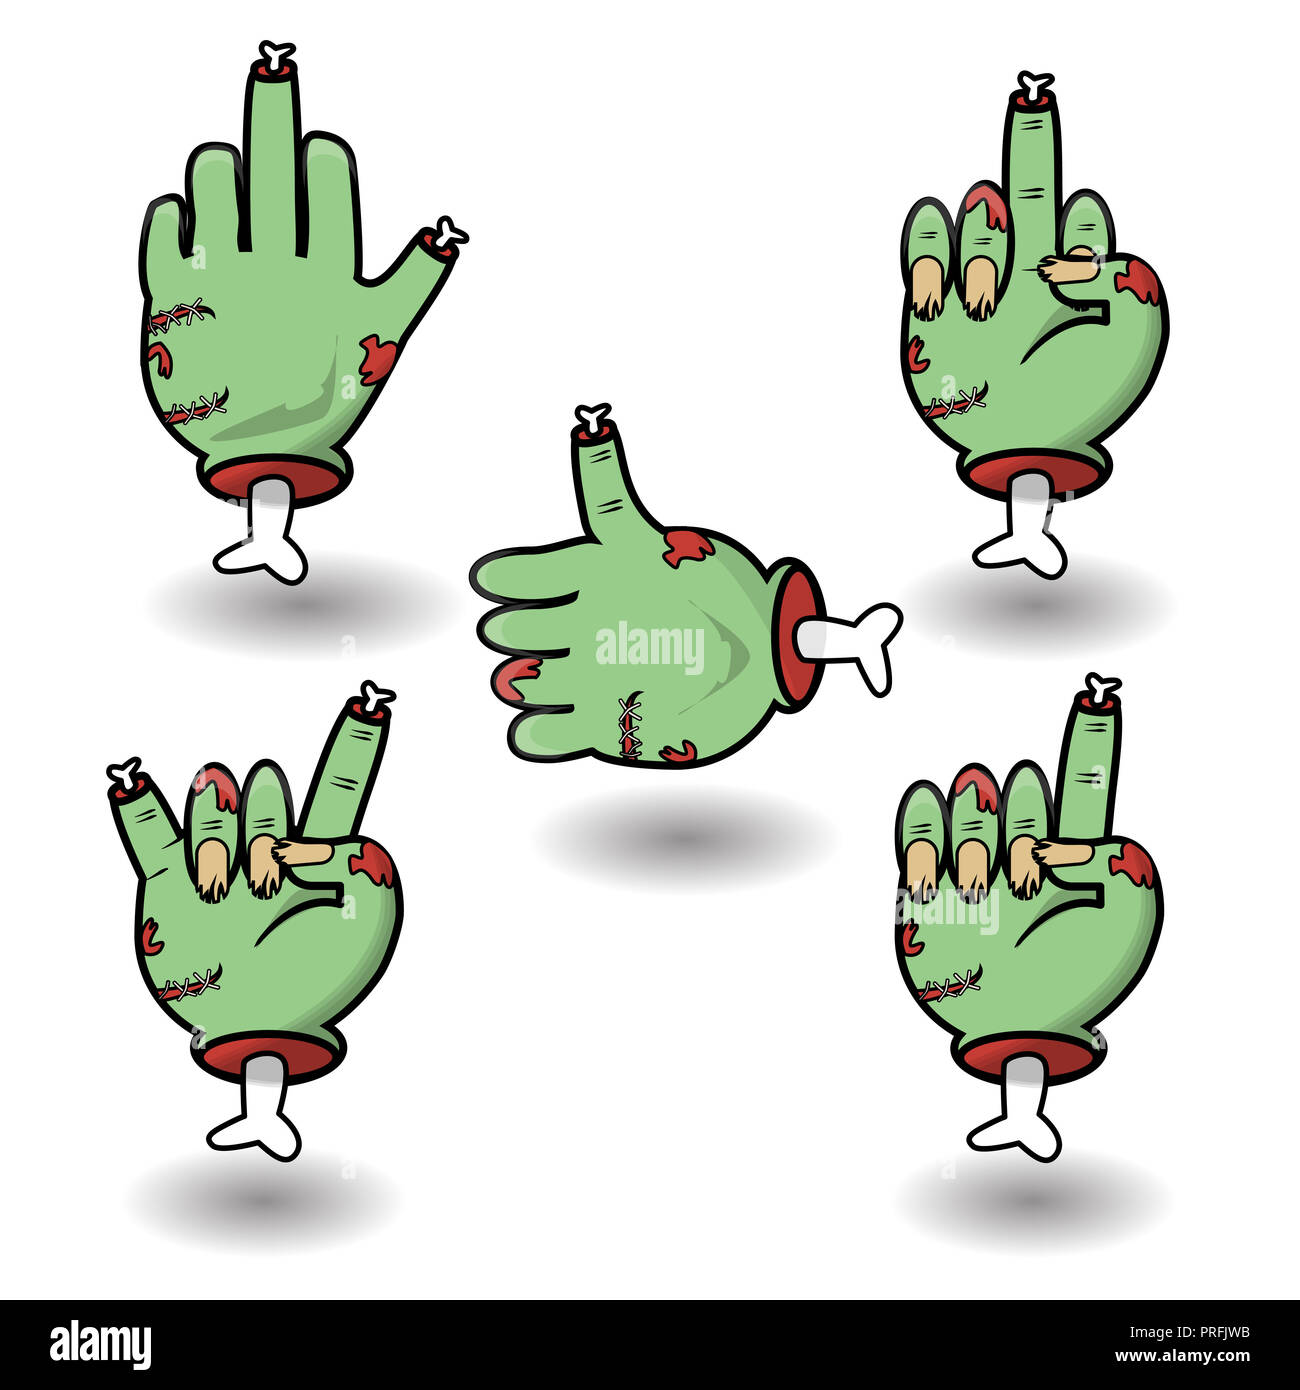 Zombie hand Cut Out Stock Images & Pictures - Alamy